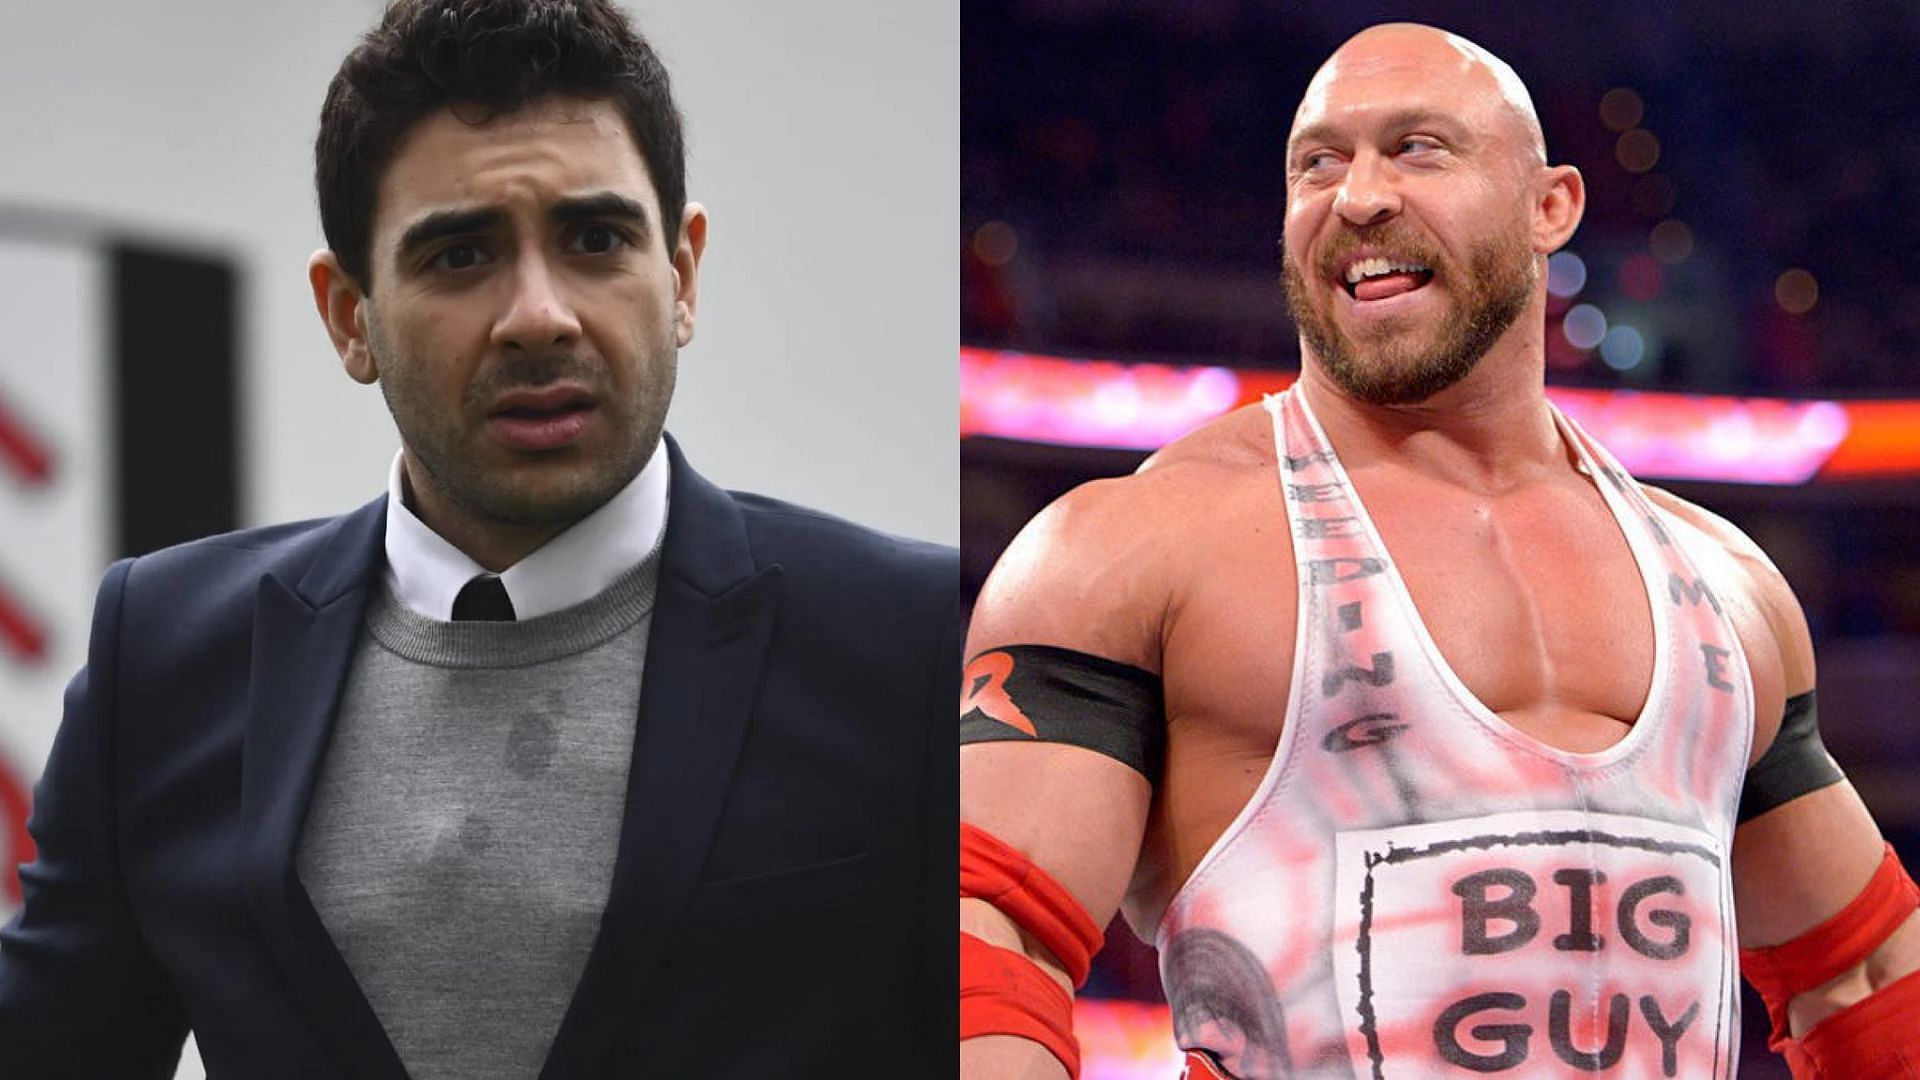 Will Tony Khan sign this star because of what Ryback believes?